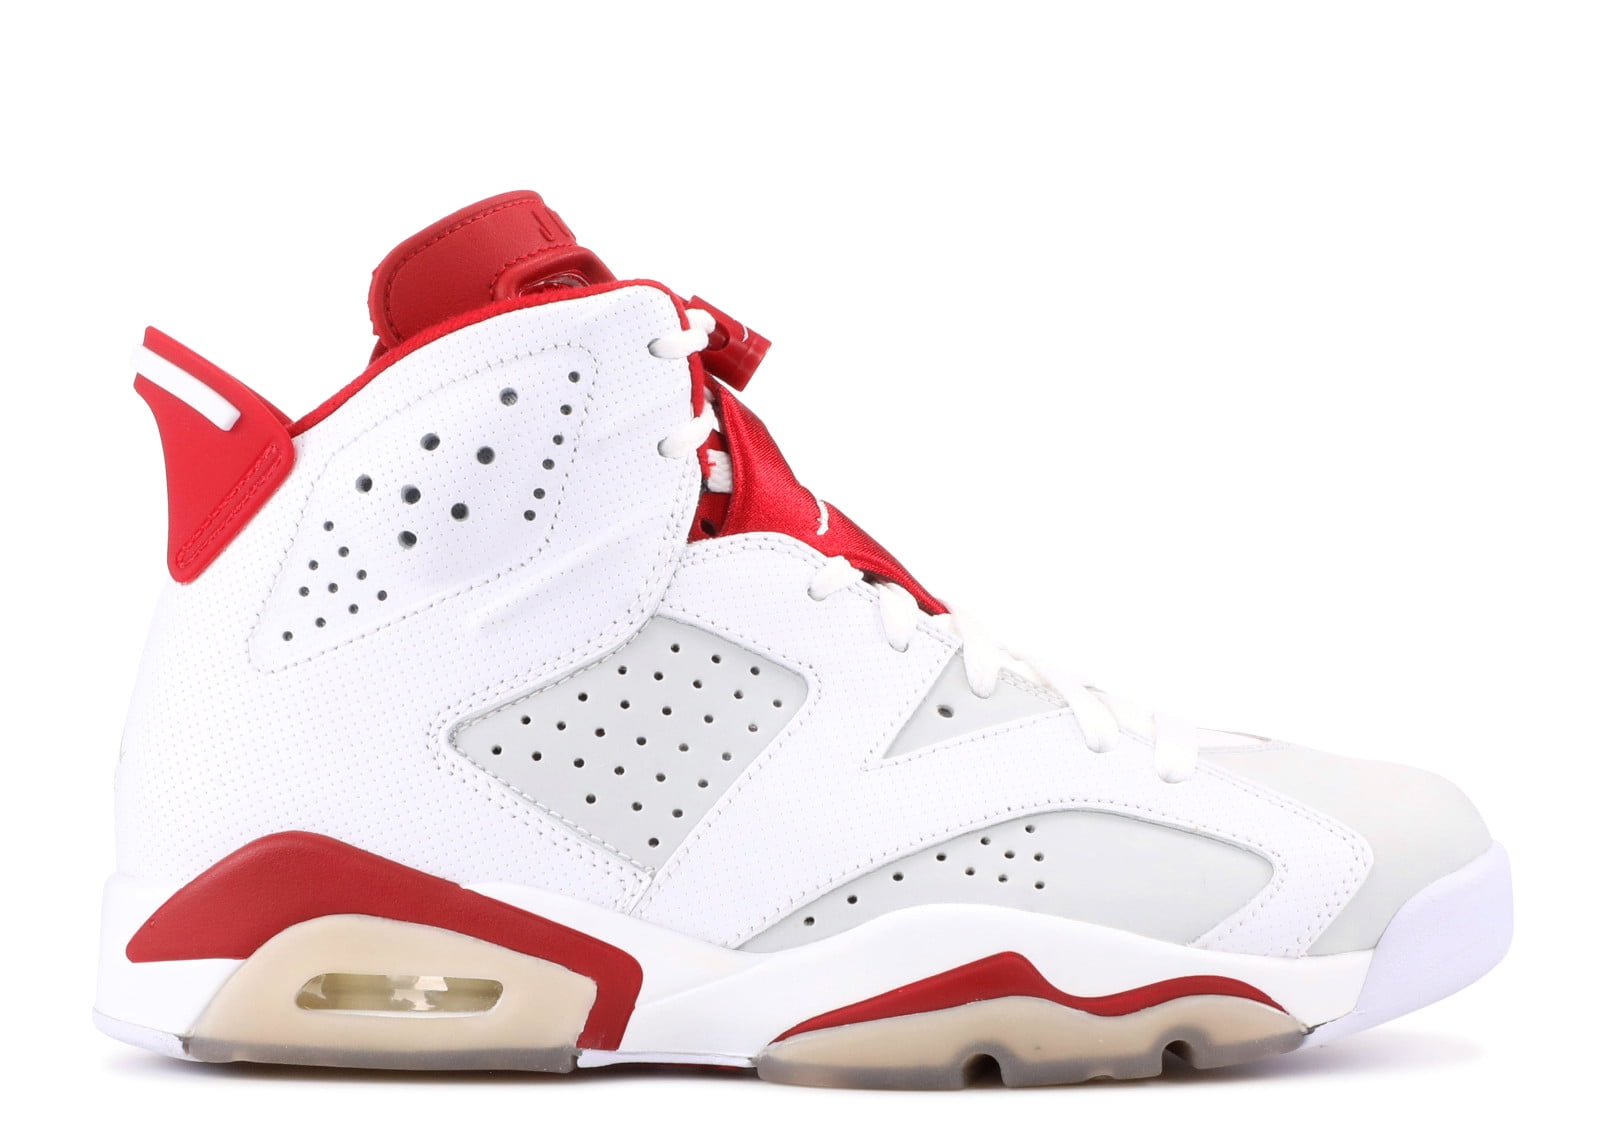 jordans 6 white and red